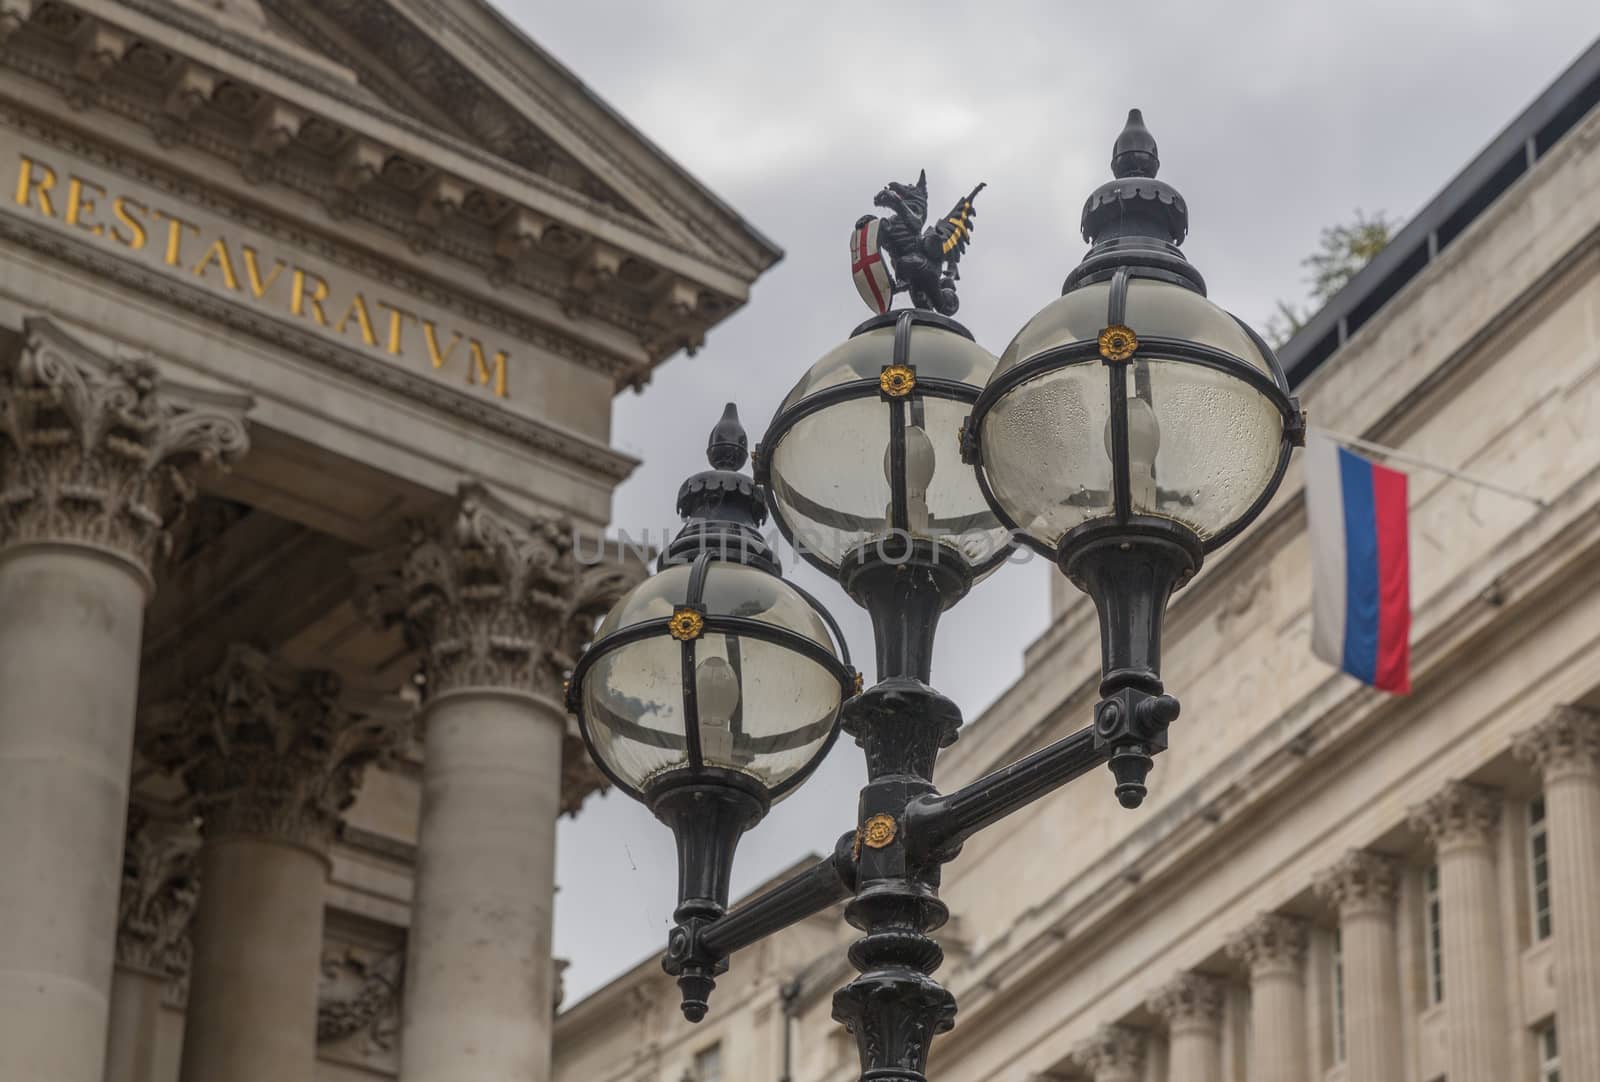 The old City of London Street Lights near the Bank of England by chrisukphoto